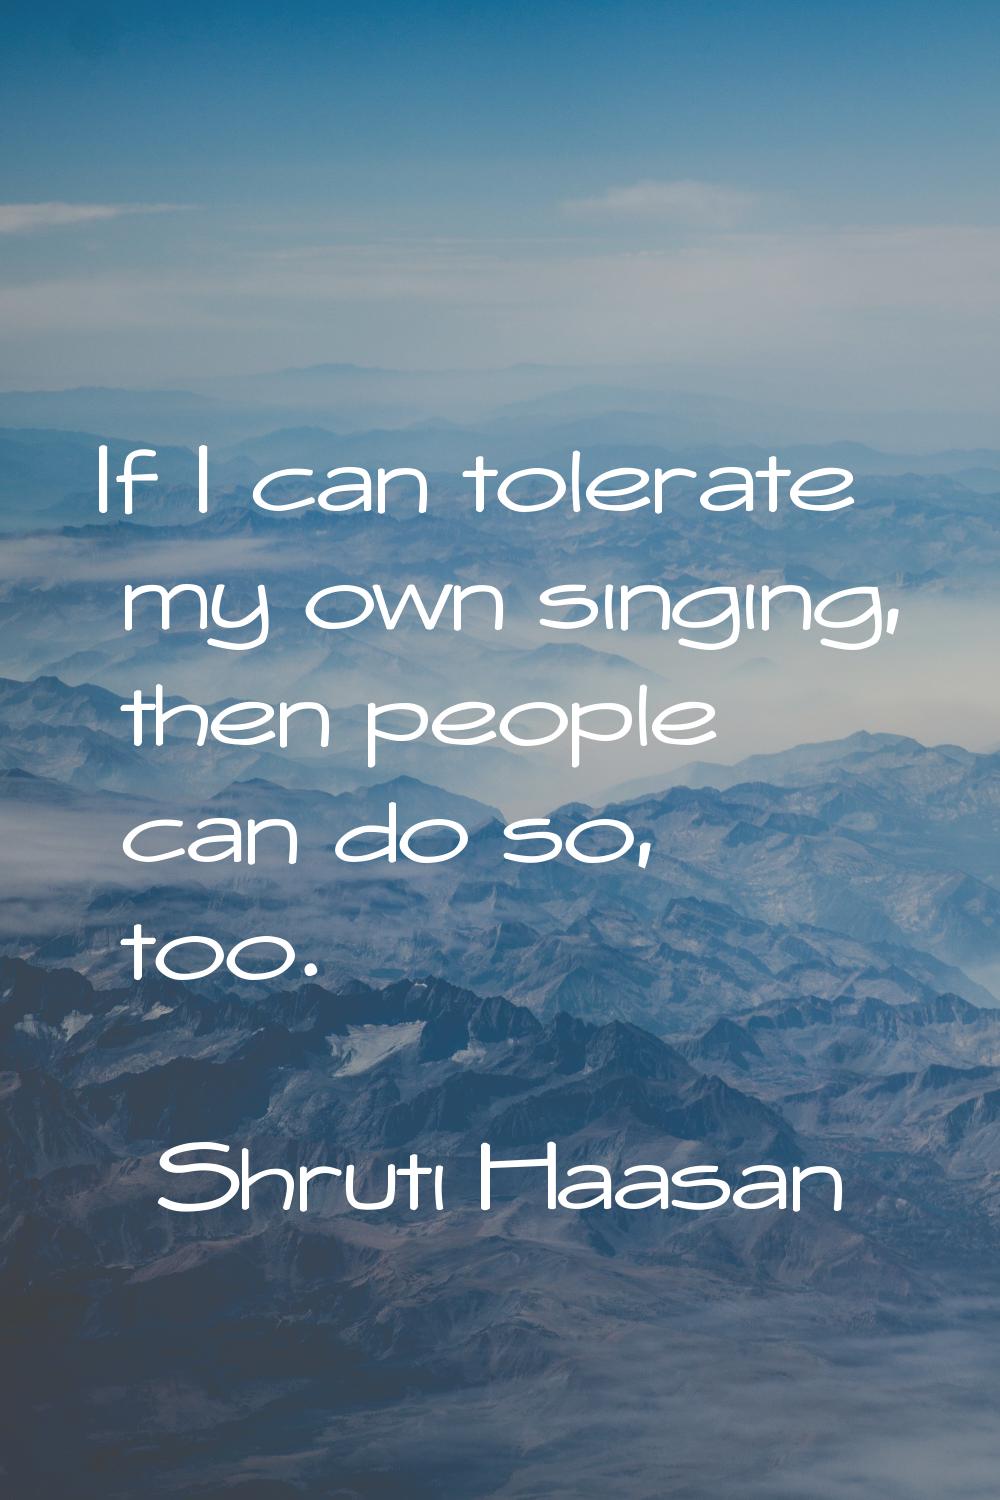 If I can tolerate my own singing, then people can do so, too.